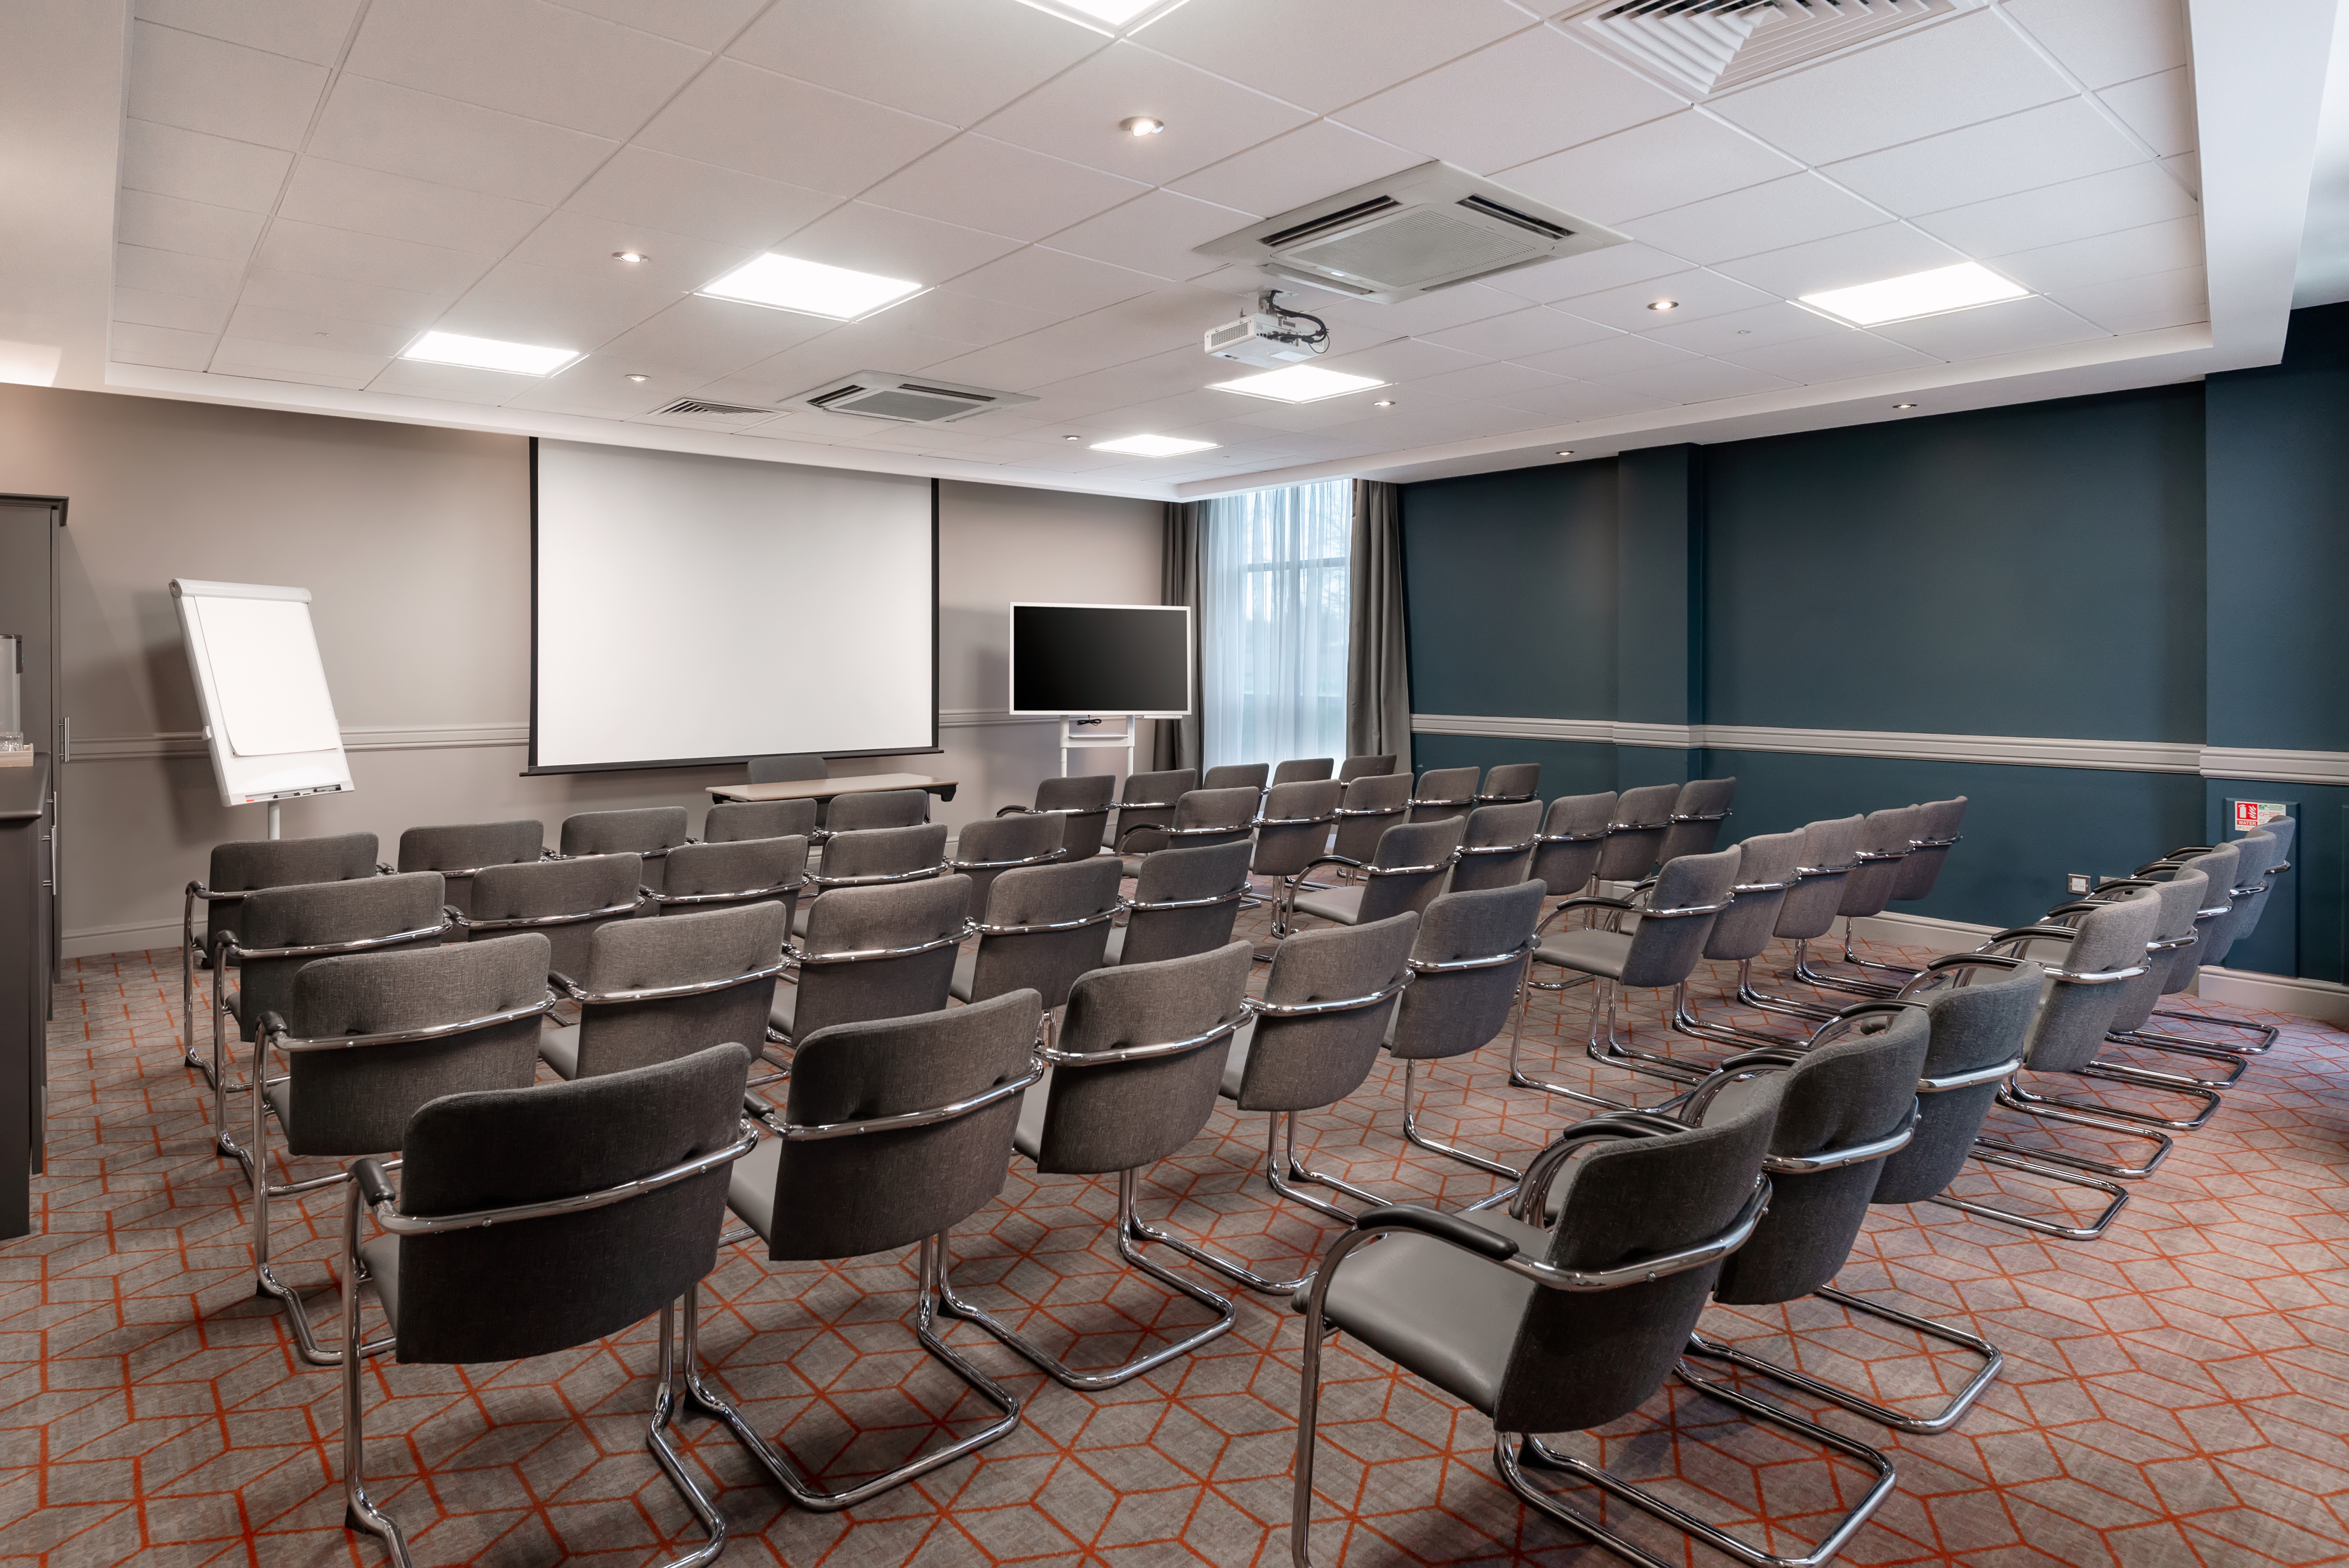 Meeting Room Classroom Seating and Projector Screen